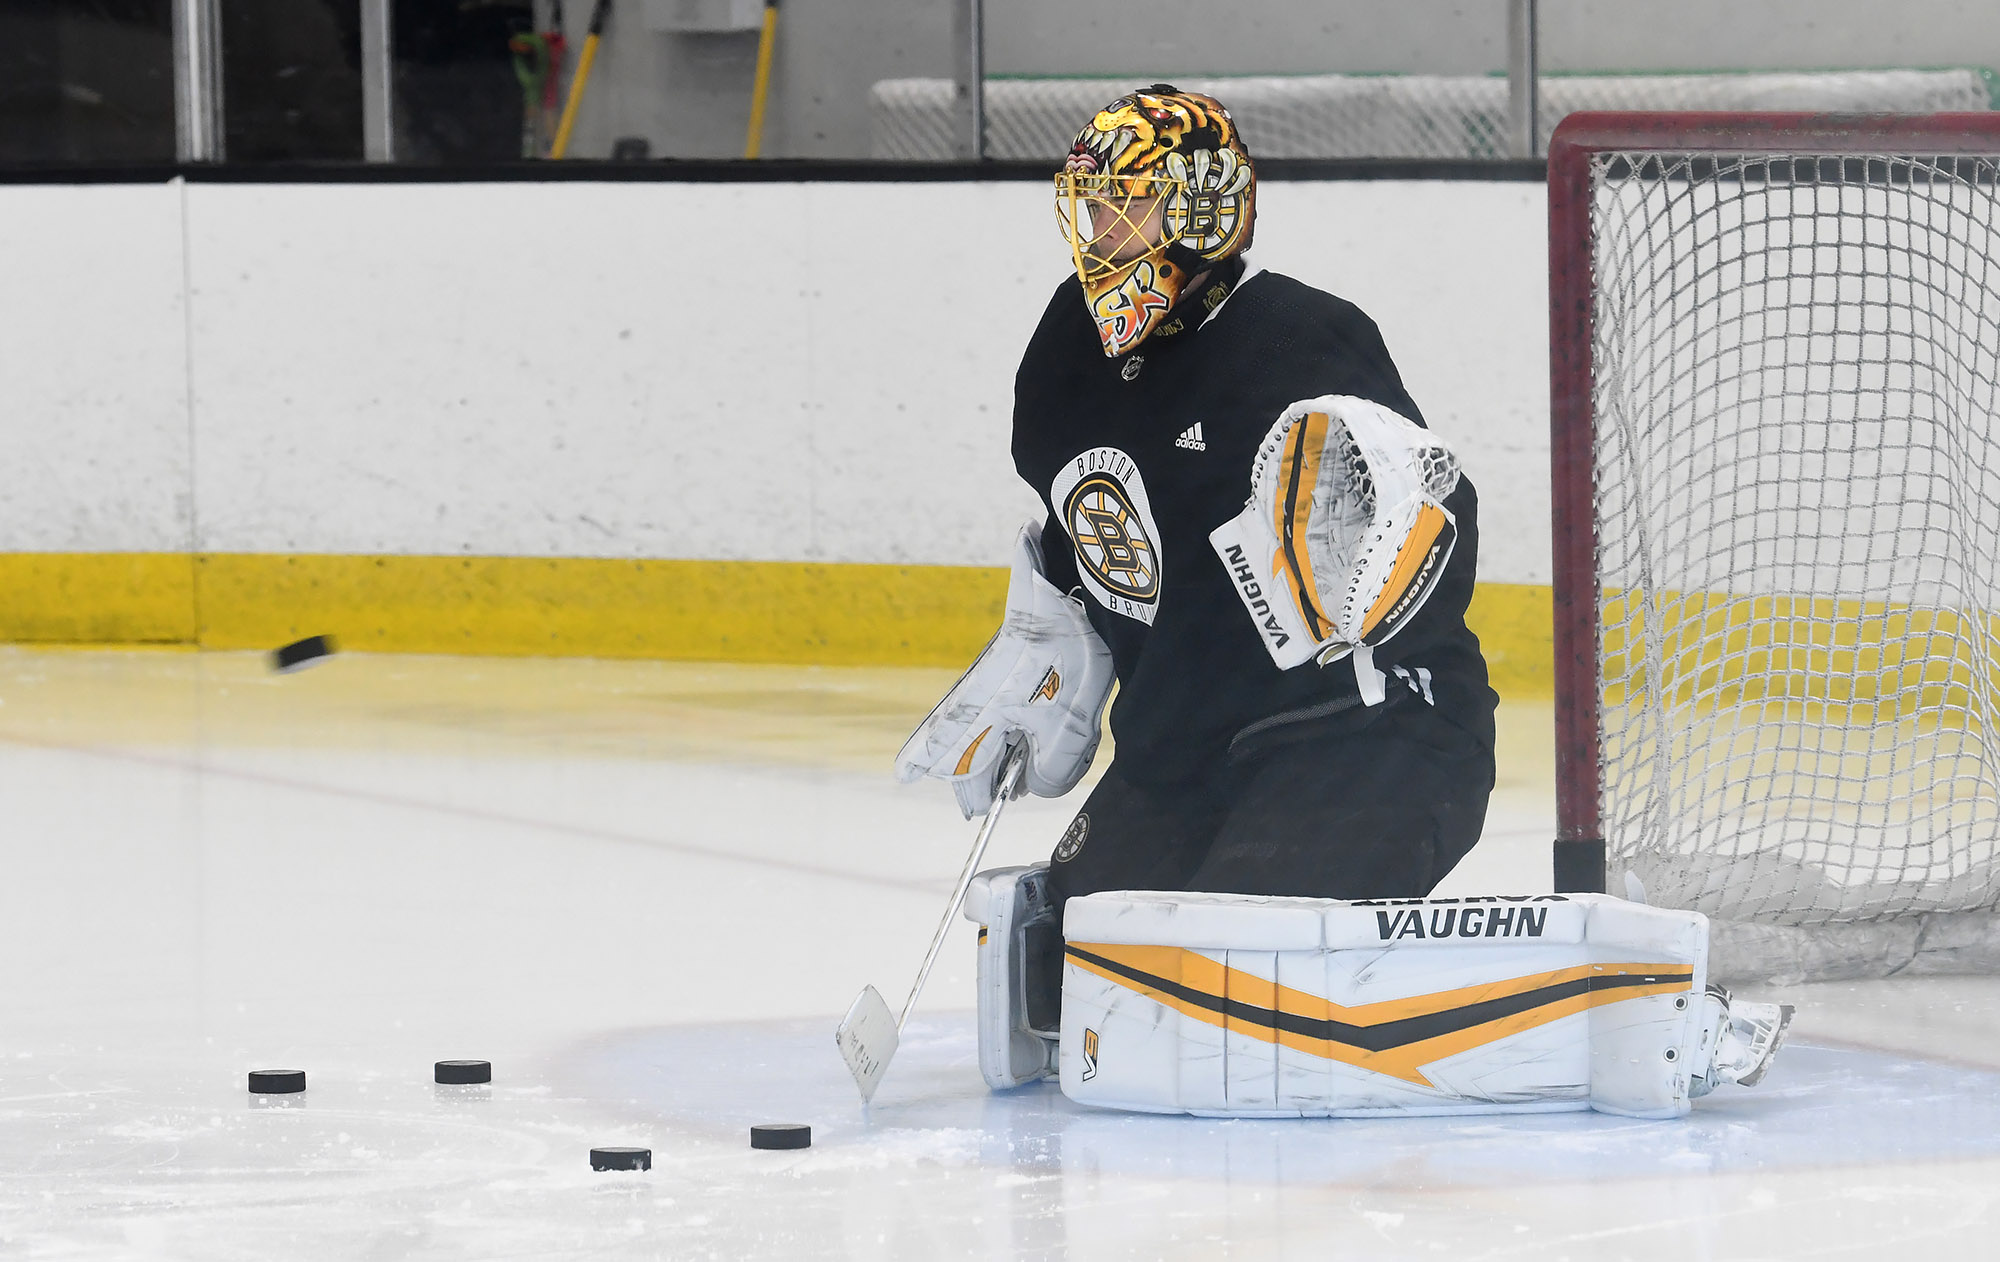 Support for Tuukka Rask to Hall of Fame is puzzling